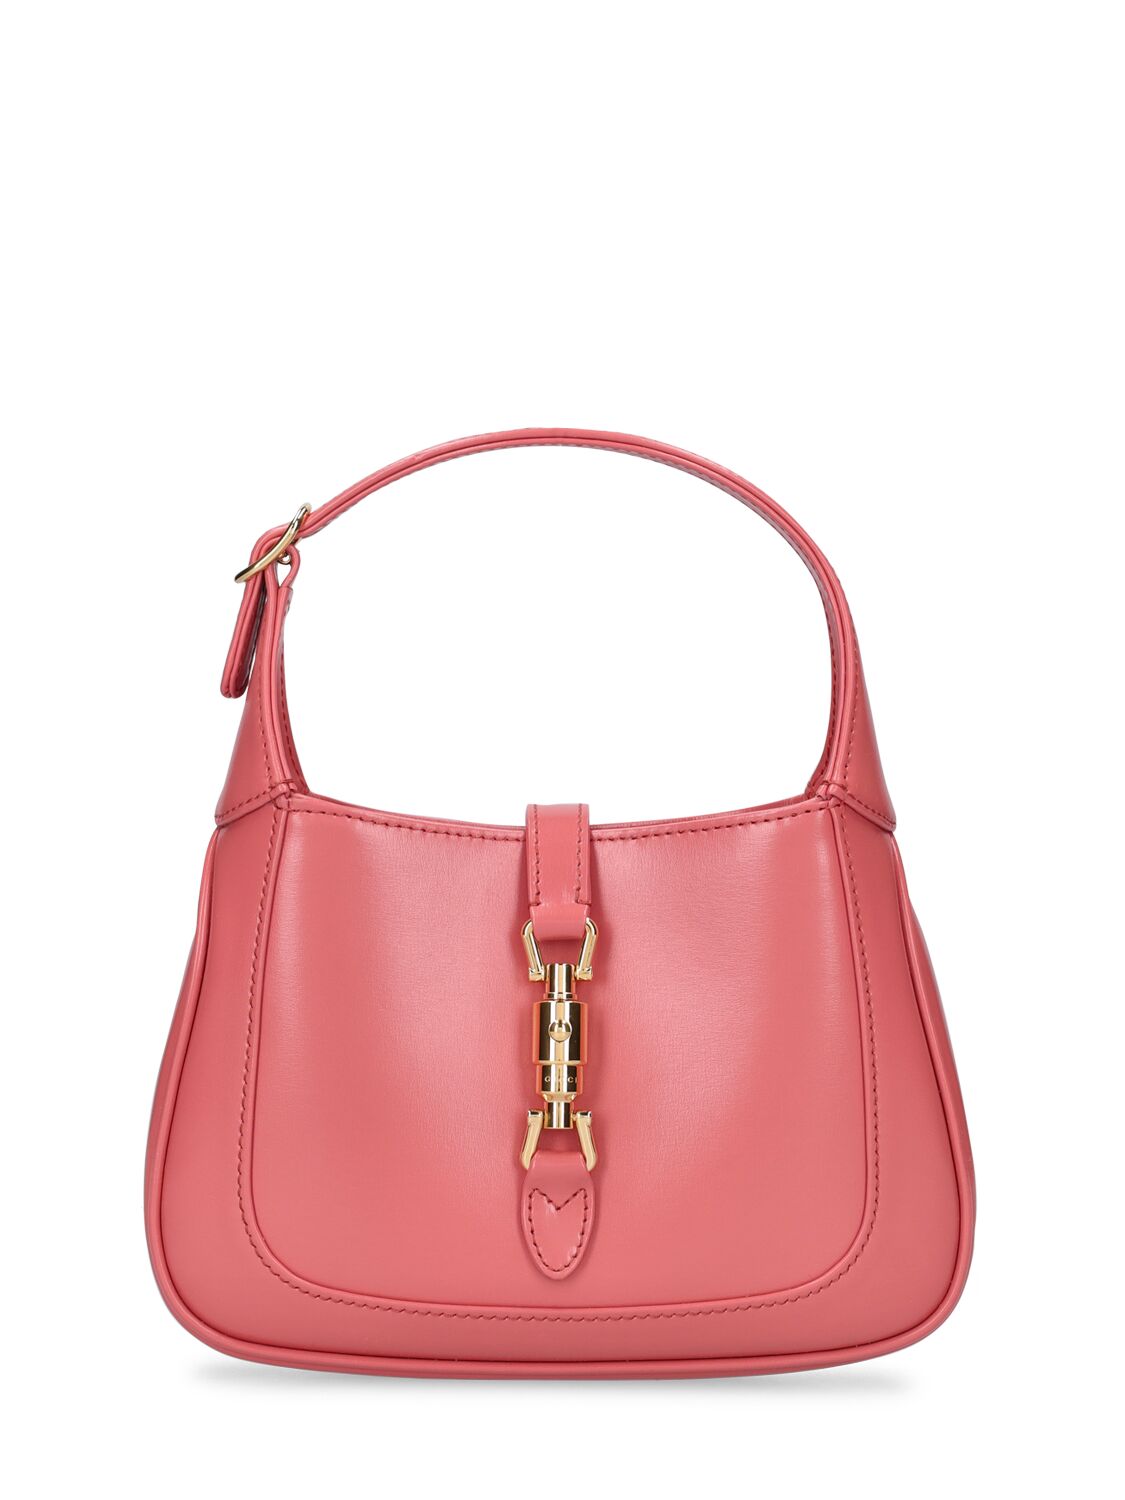 Jackie 1961 Mini Hobo Bag In Light Pink Leather